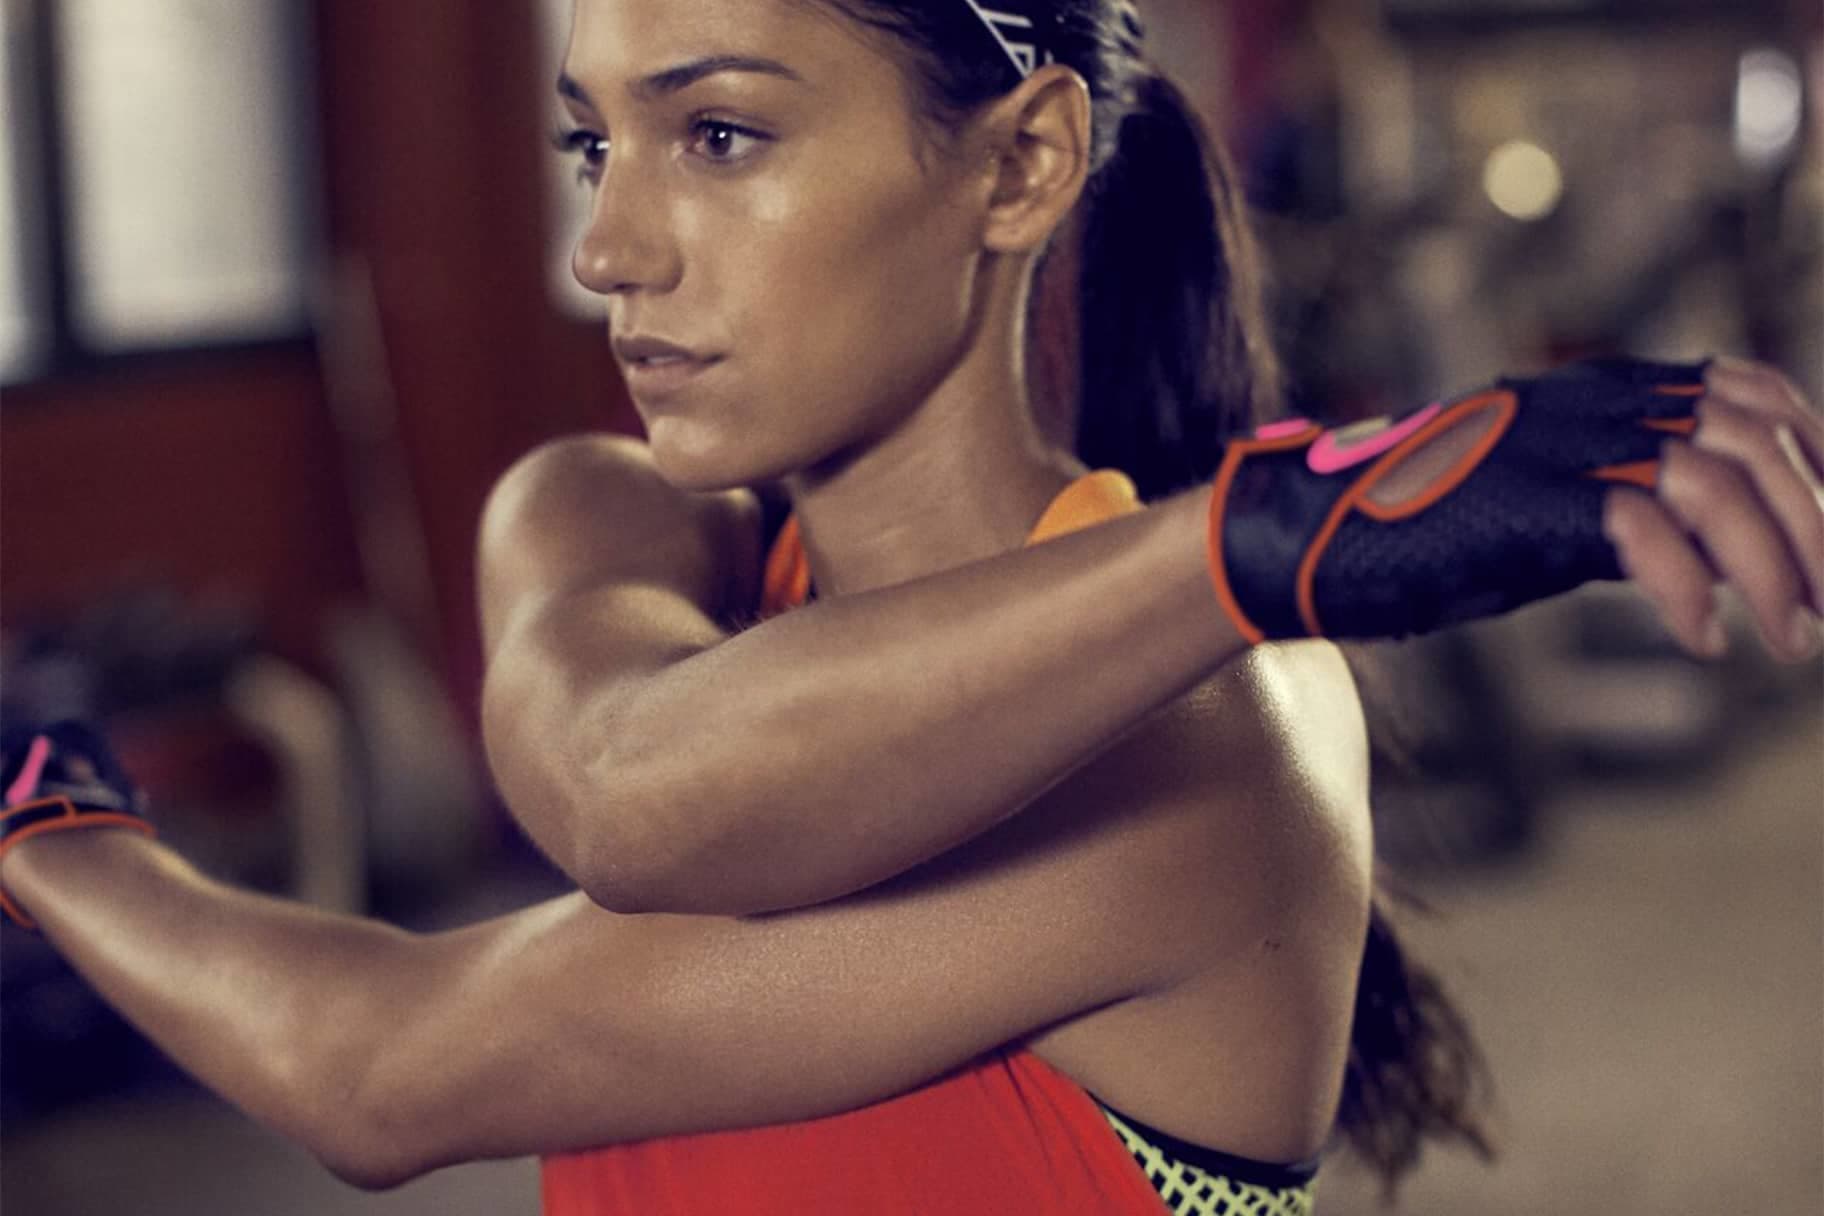 5. "Hairstyles That Will Stay Put During Your Toughest Workouts" - wide 6